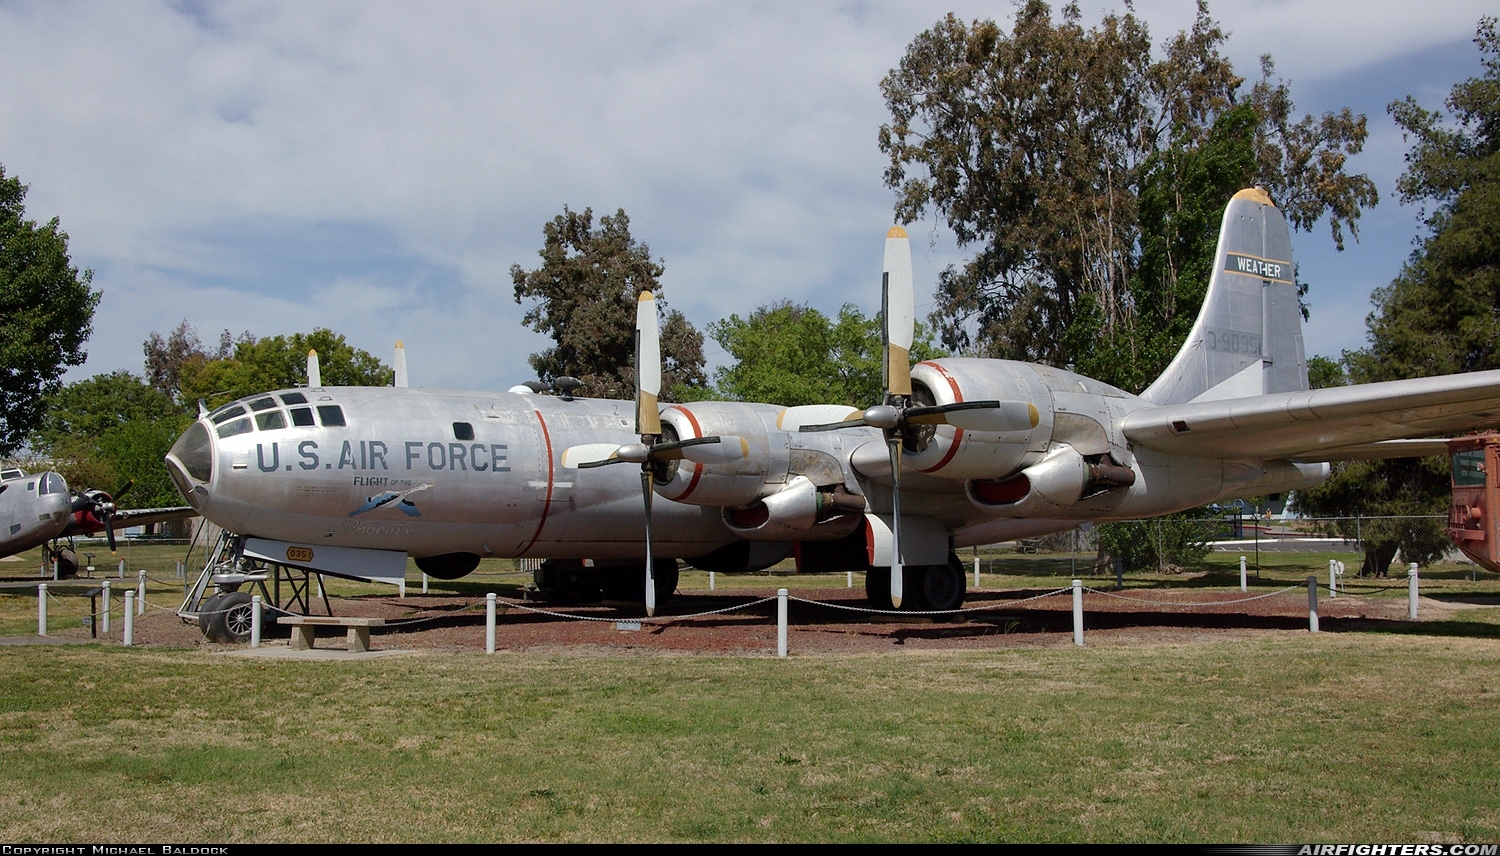 USA - Air Force Boeing WB-50D Superfortress 49-0351 at Atwater (Merced) - Castle (AFB) (MER / KMER), USA